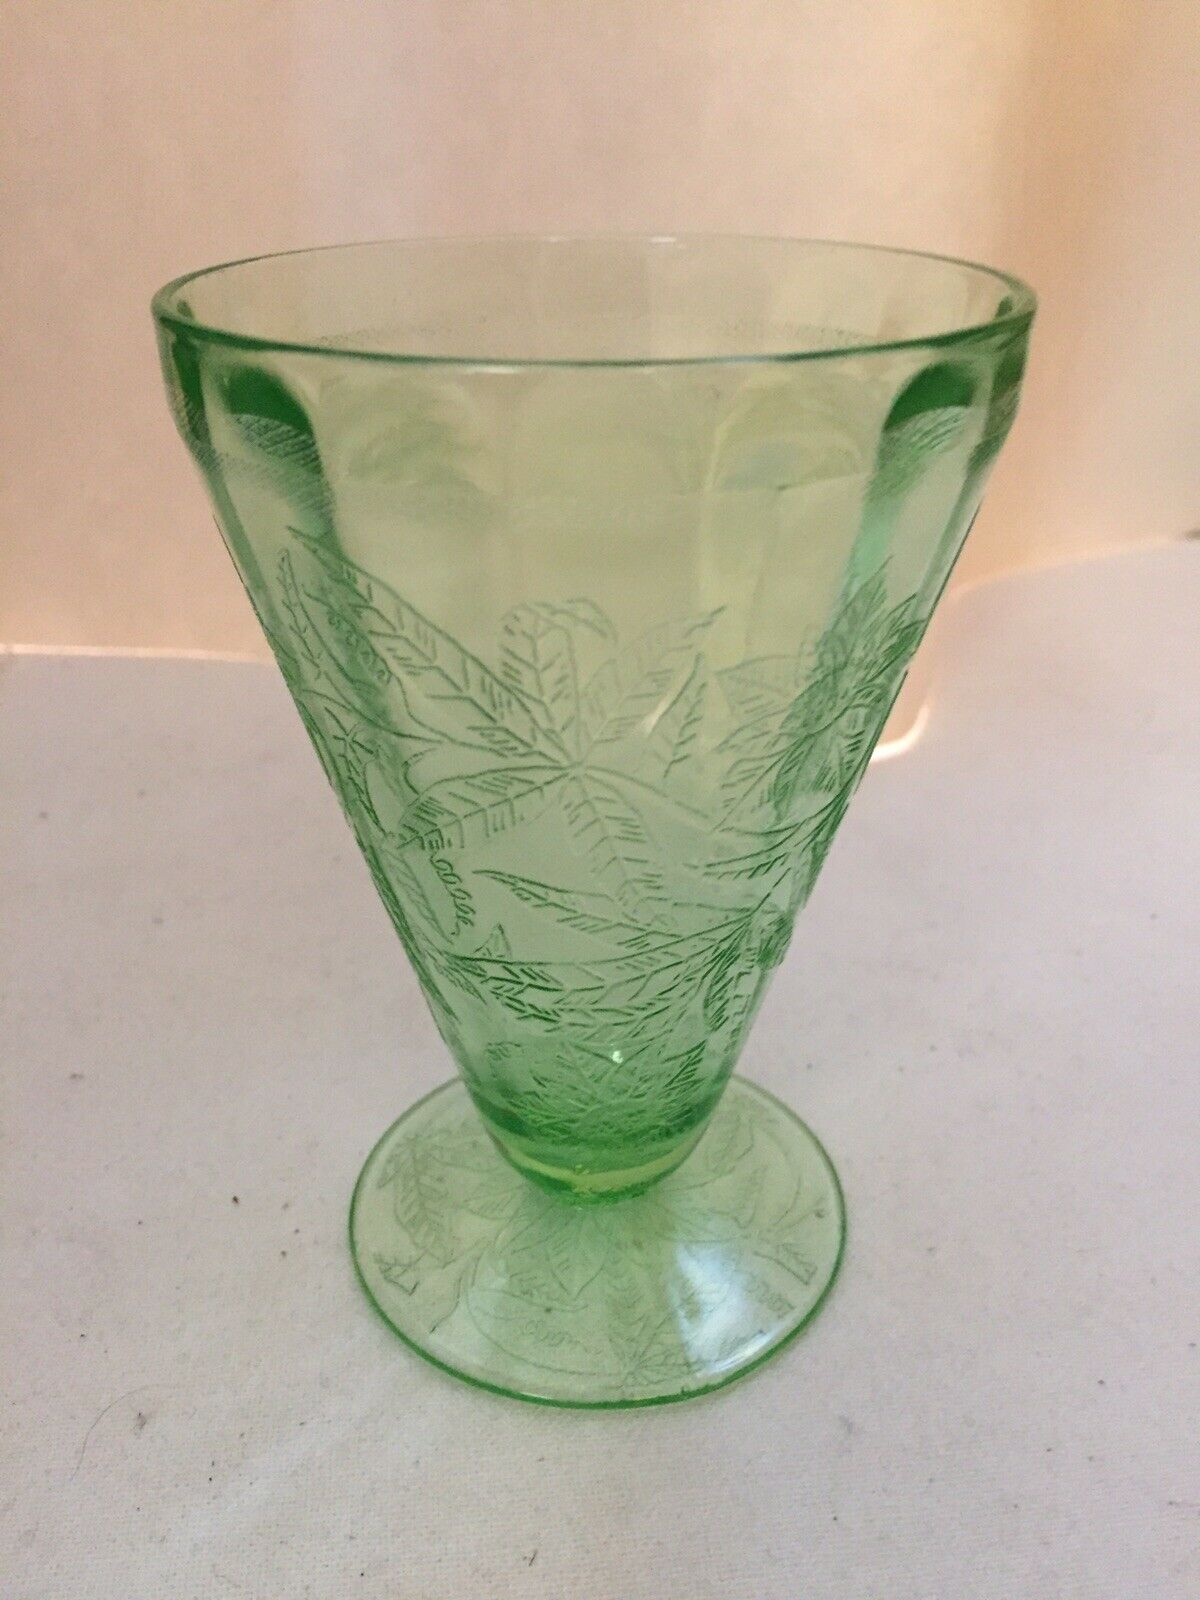 Vintage 4 5/8” Green Footed Tumbler. Floral “poinsettia” - Jeannette Glass Co.